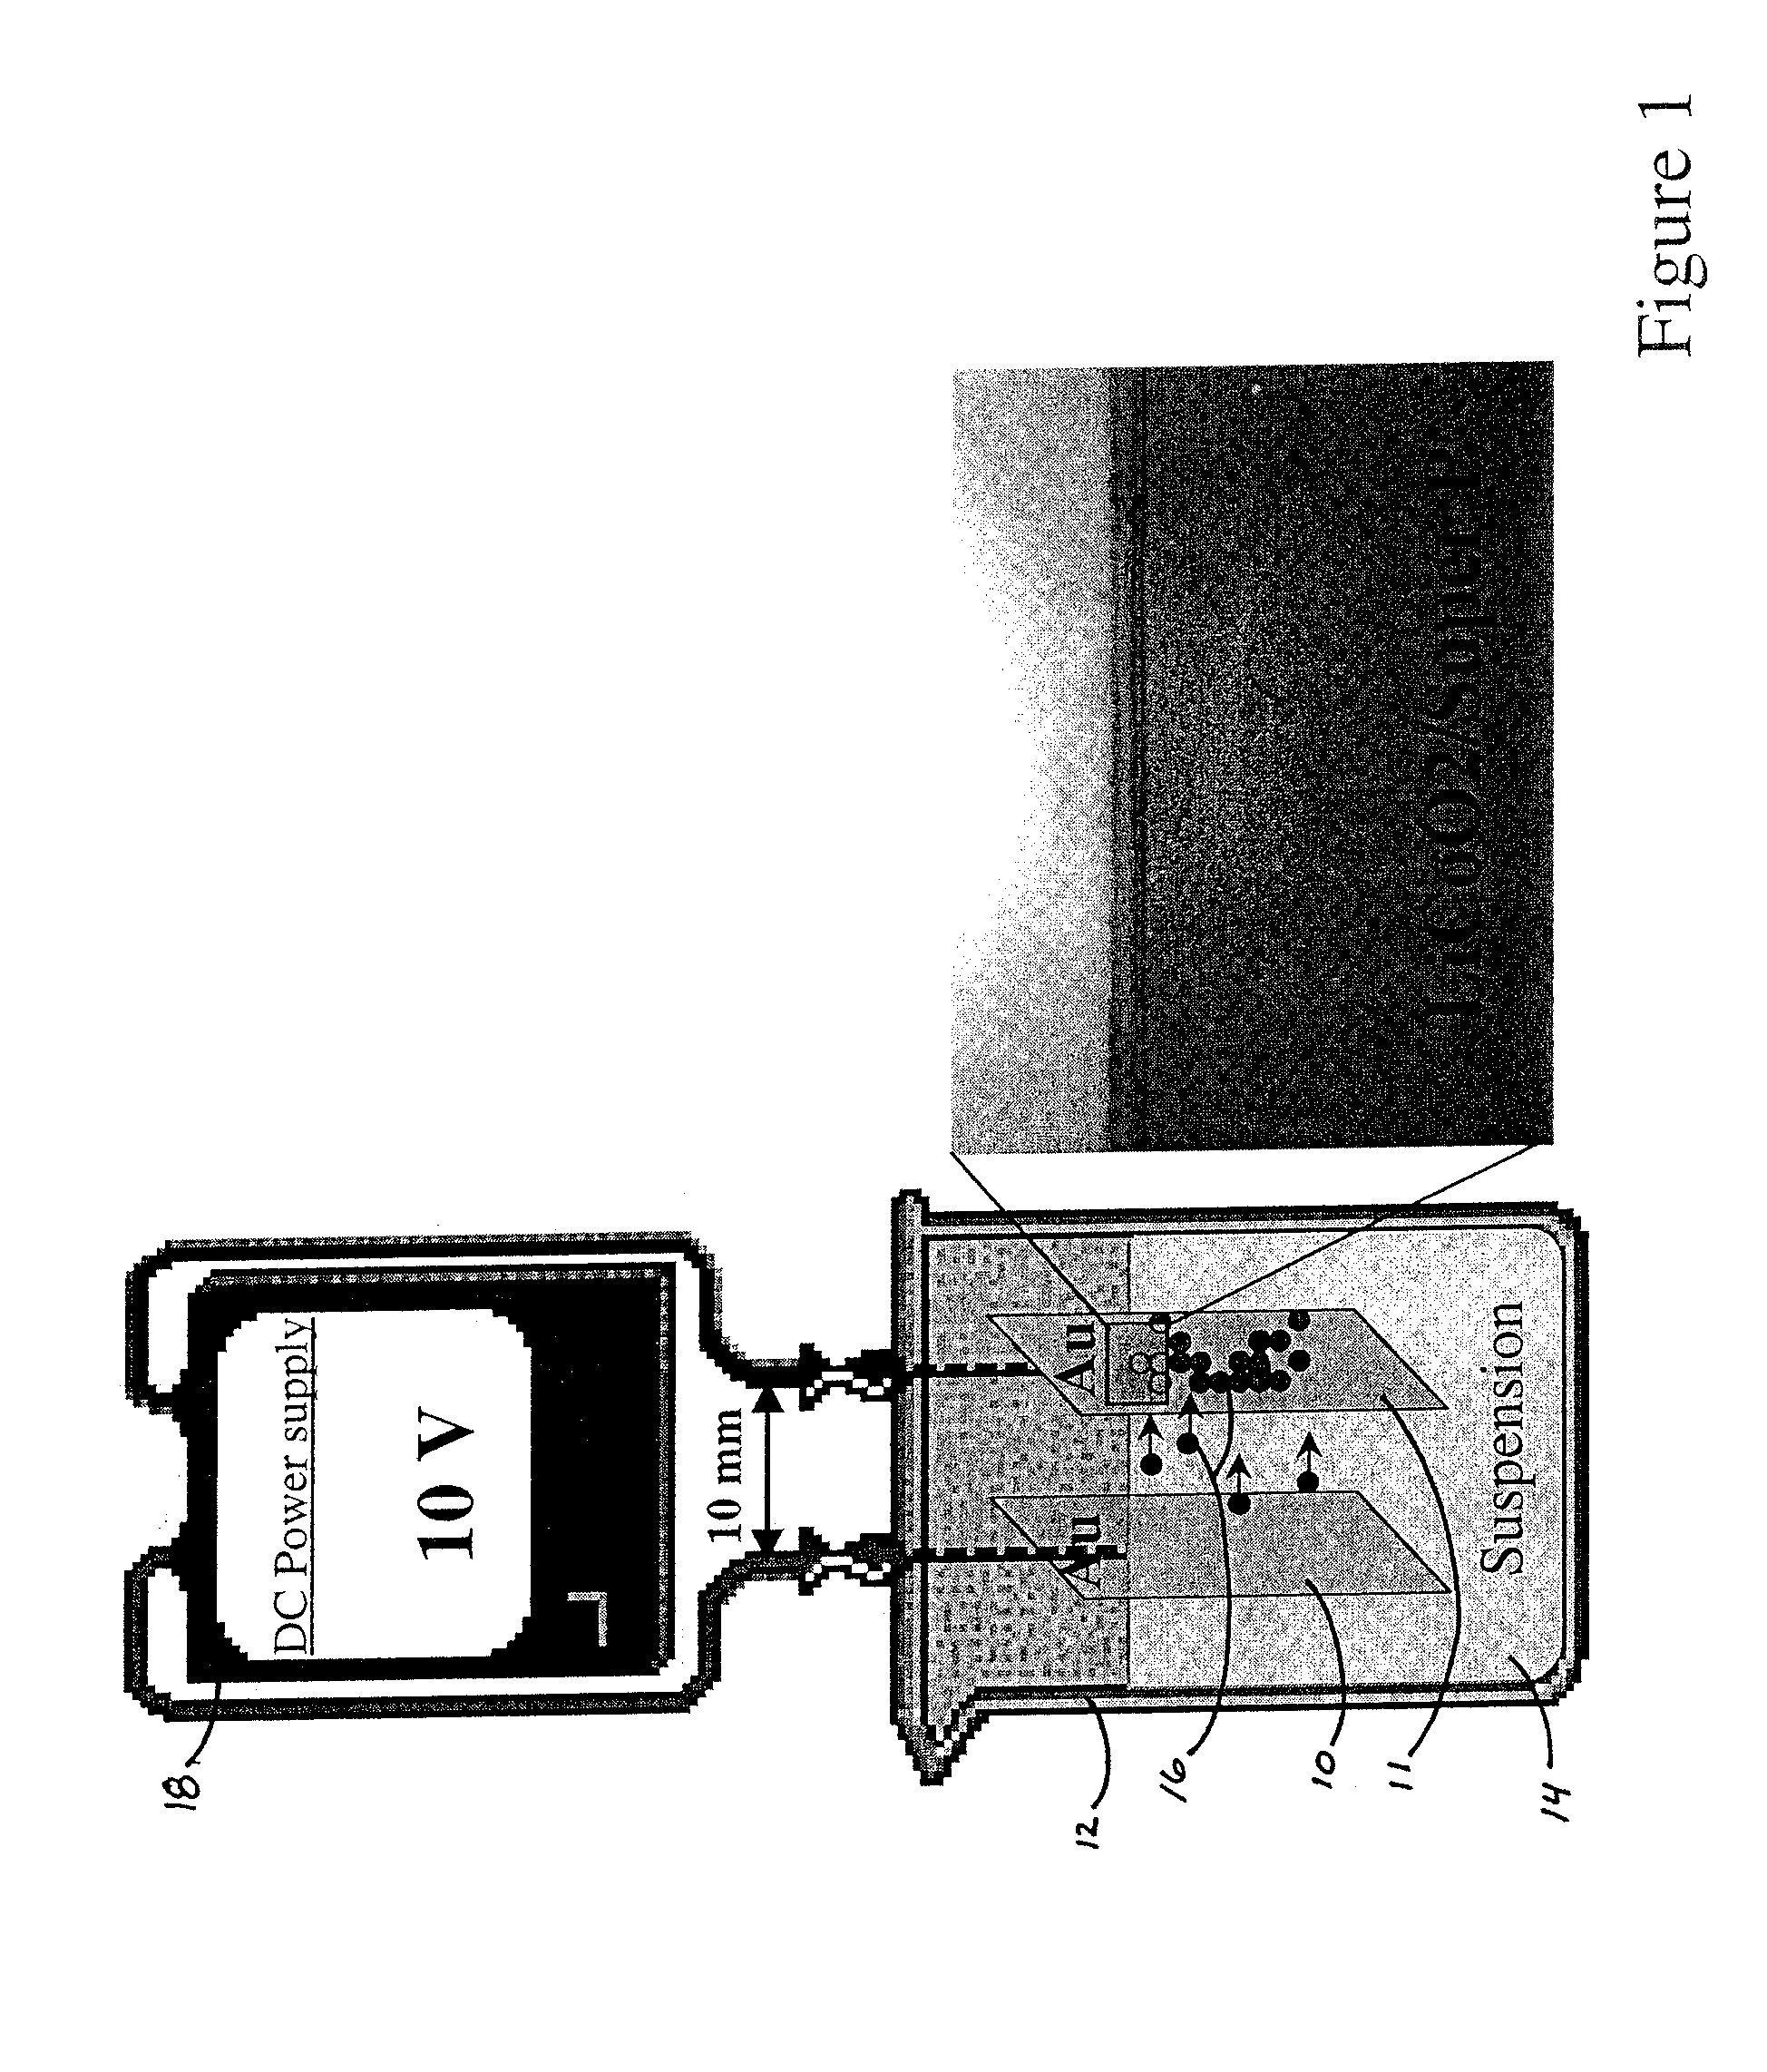 Electrophoretic assembly of electrochemical devices